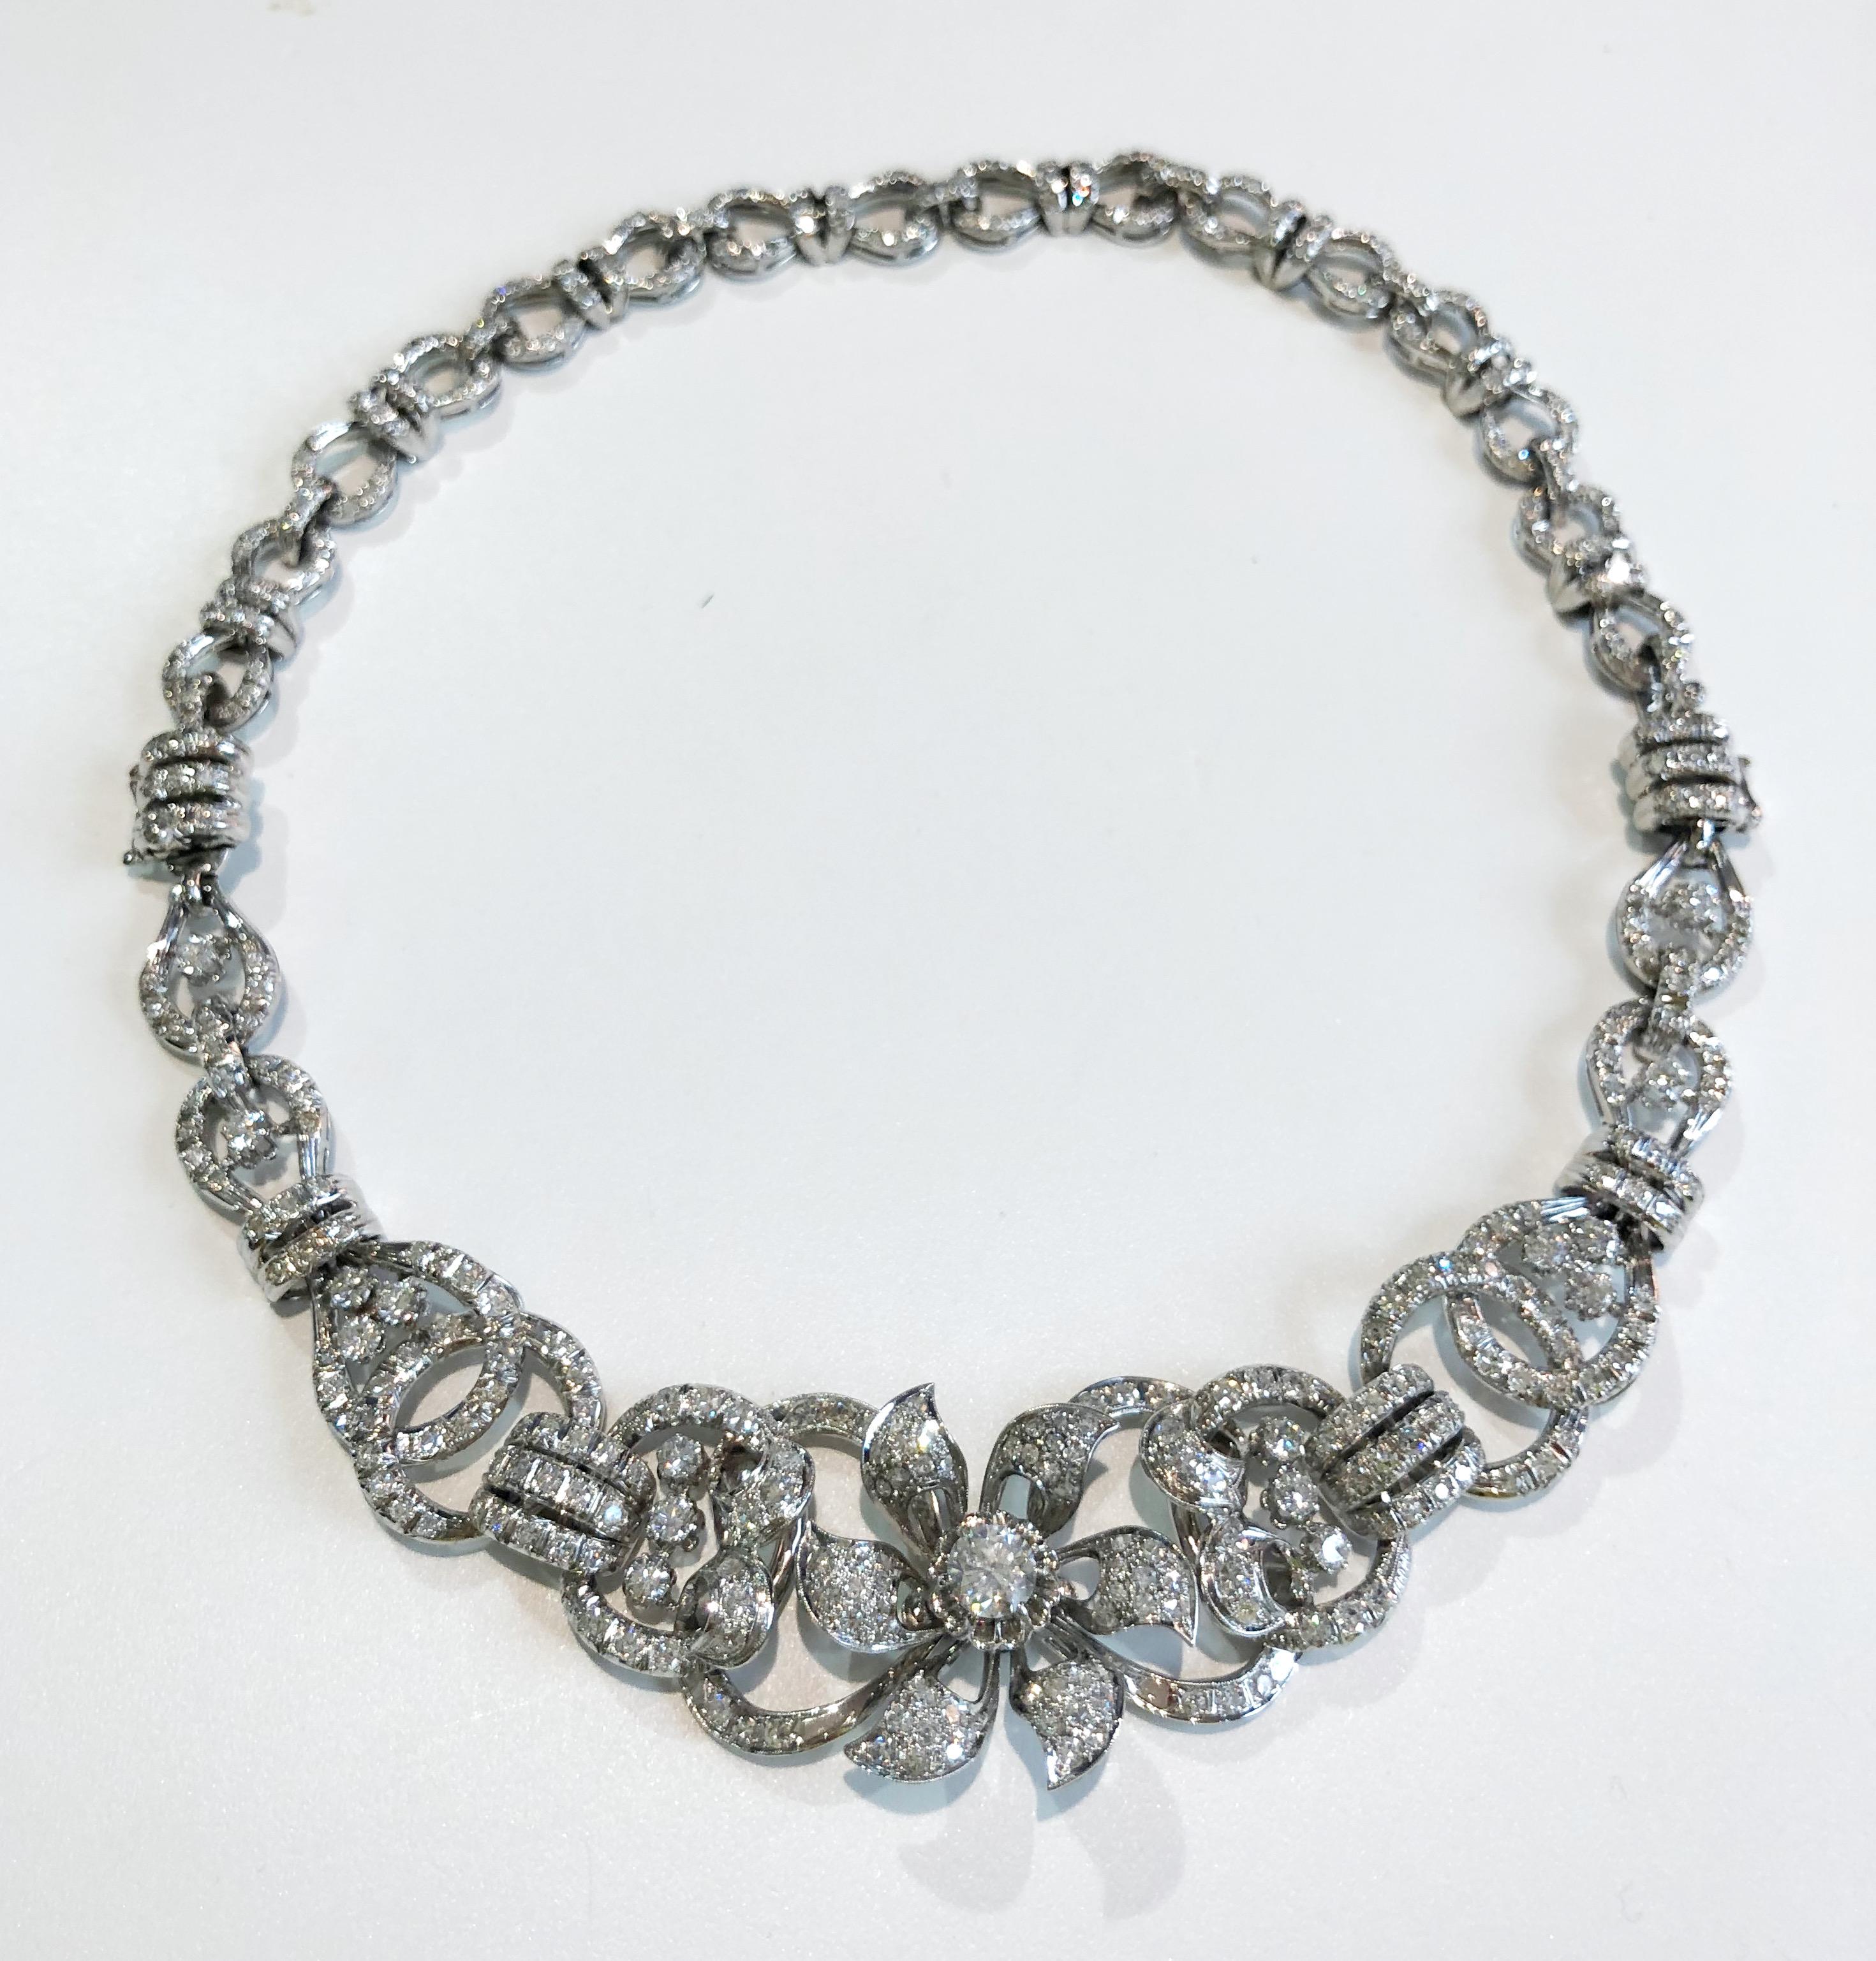 Vintage 18 karat white gold choker necklace which can also be separated into 2 bracelets, with total 6.5 karats of brilliant diamonds, Italy 1950-1960
84 grams
Length 41 cm